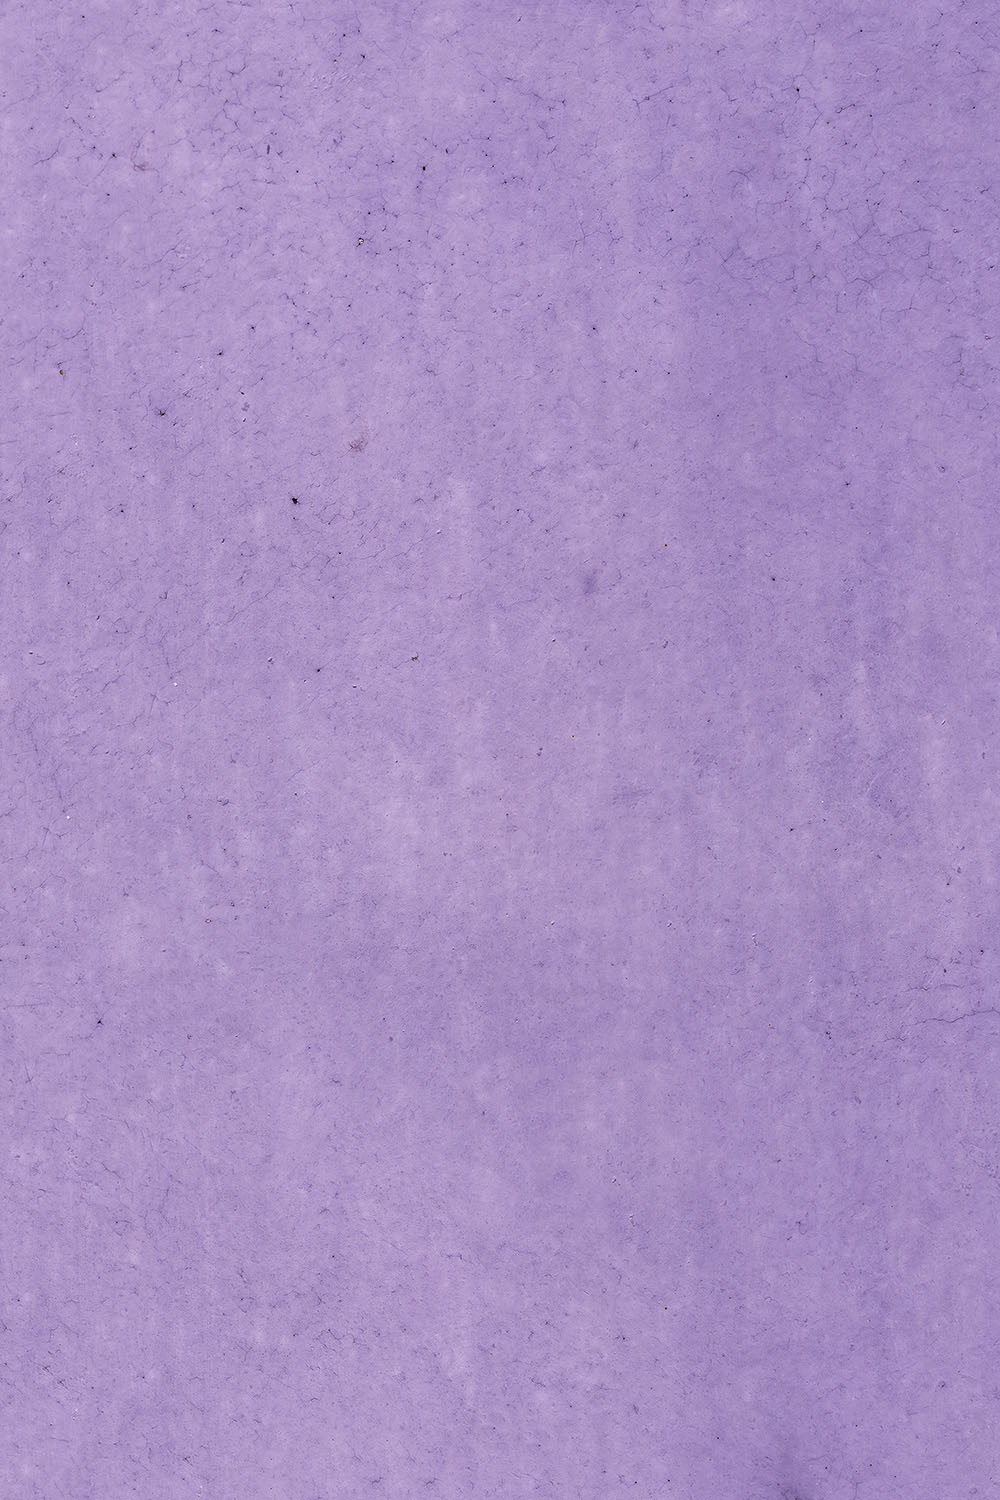 Lavender color vinyl backdrop with soft texture for all types of photography